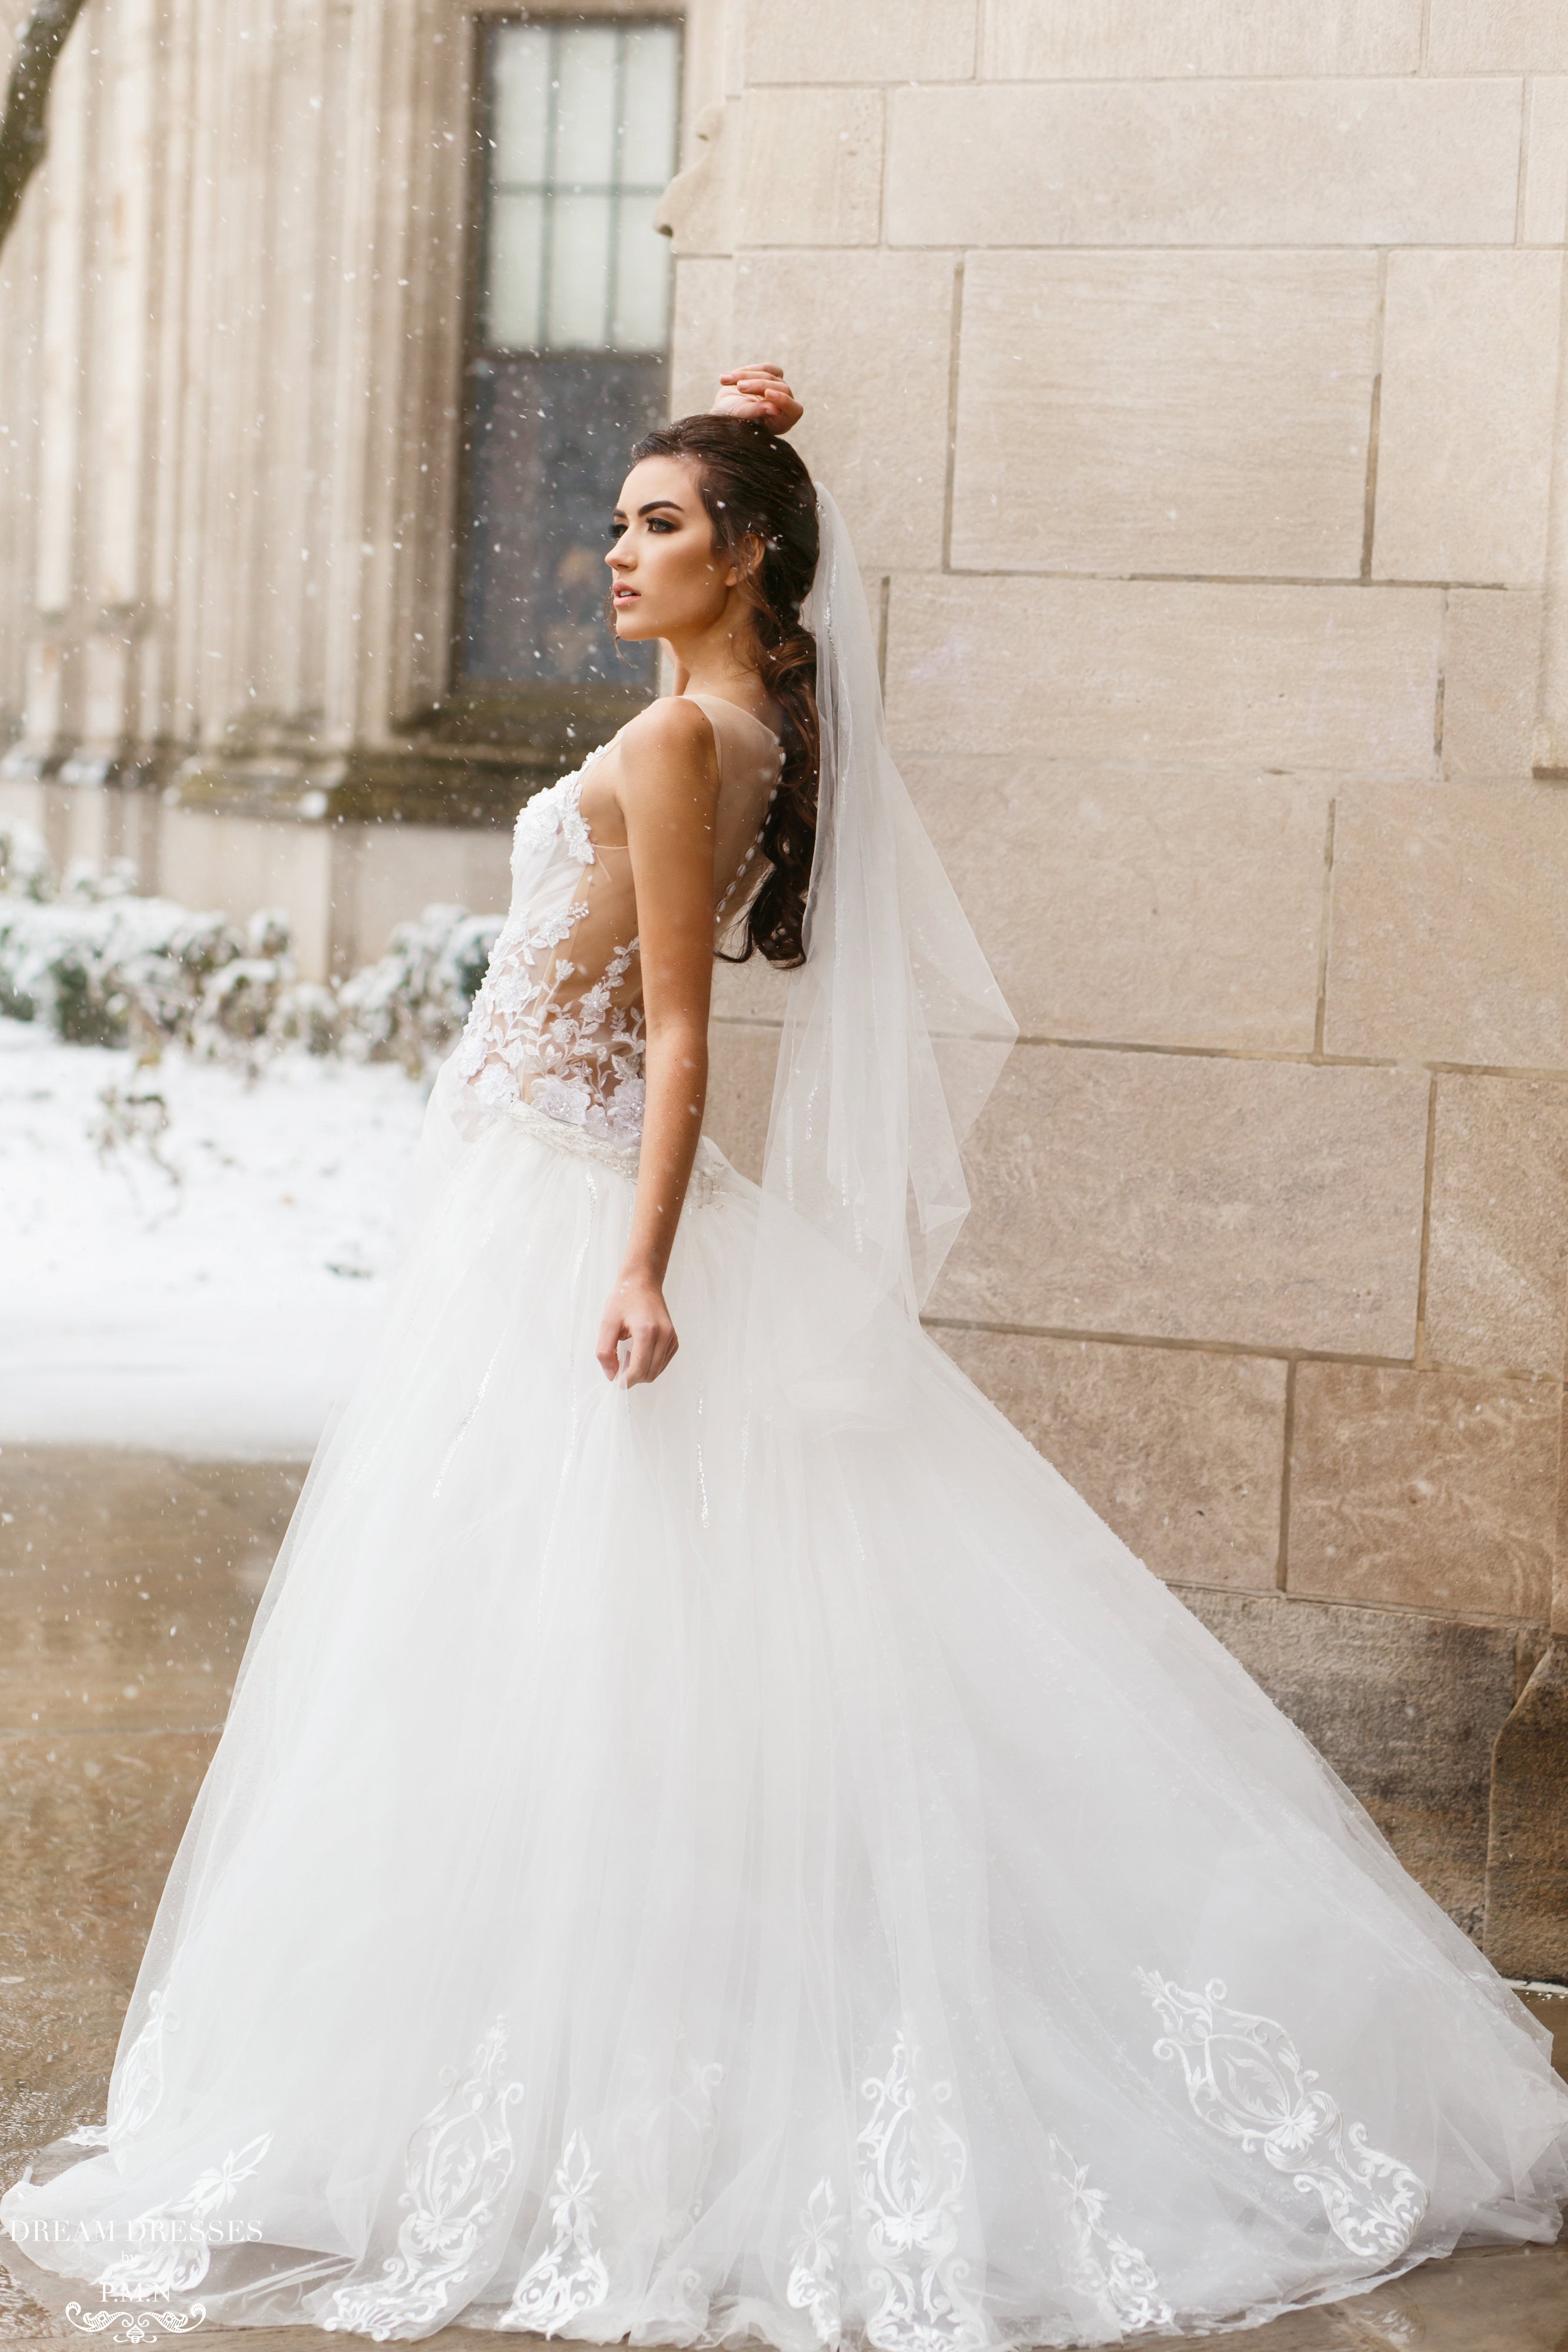 Bride Wore Semi-Sheer, Illusion Wedding Dress With Removable Skirt